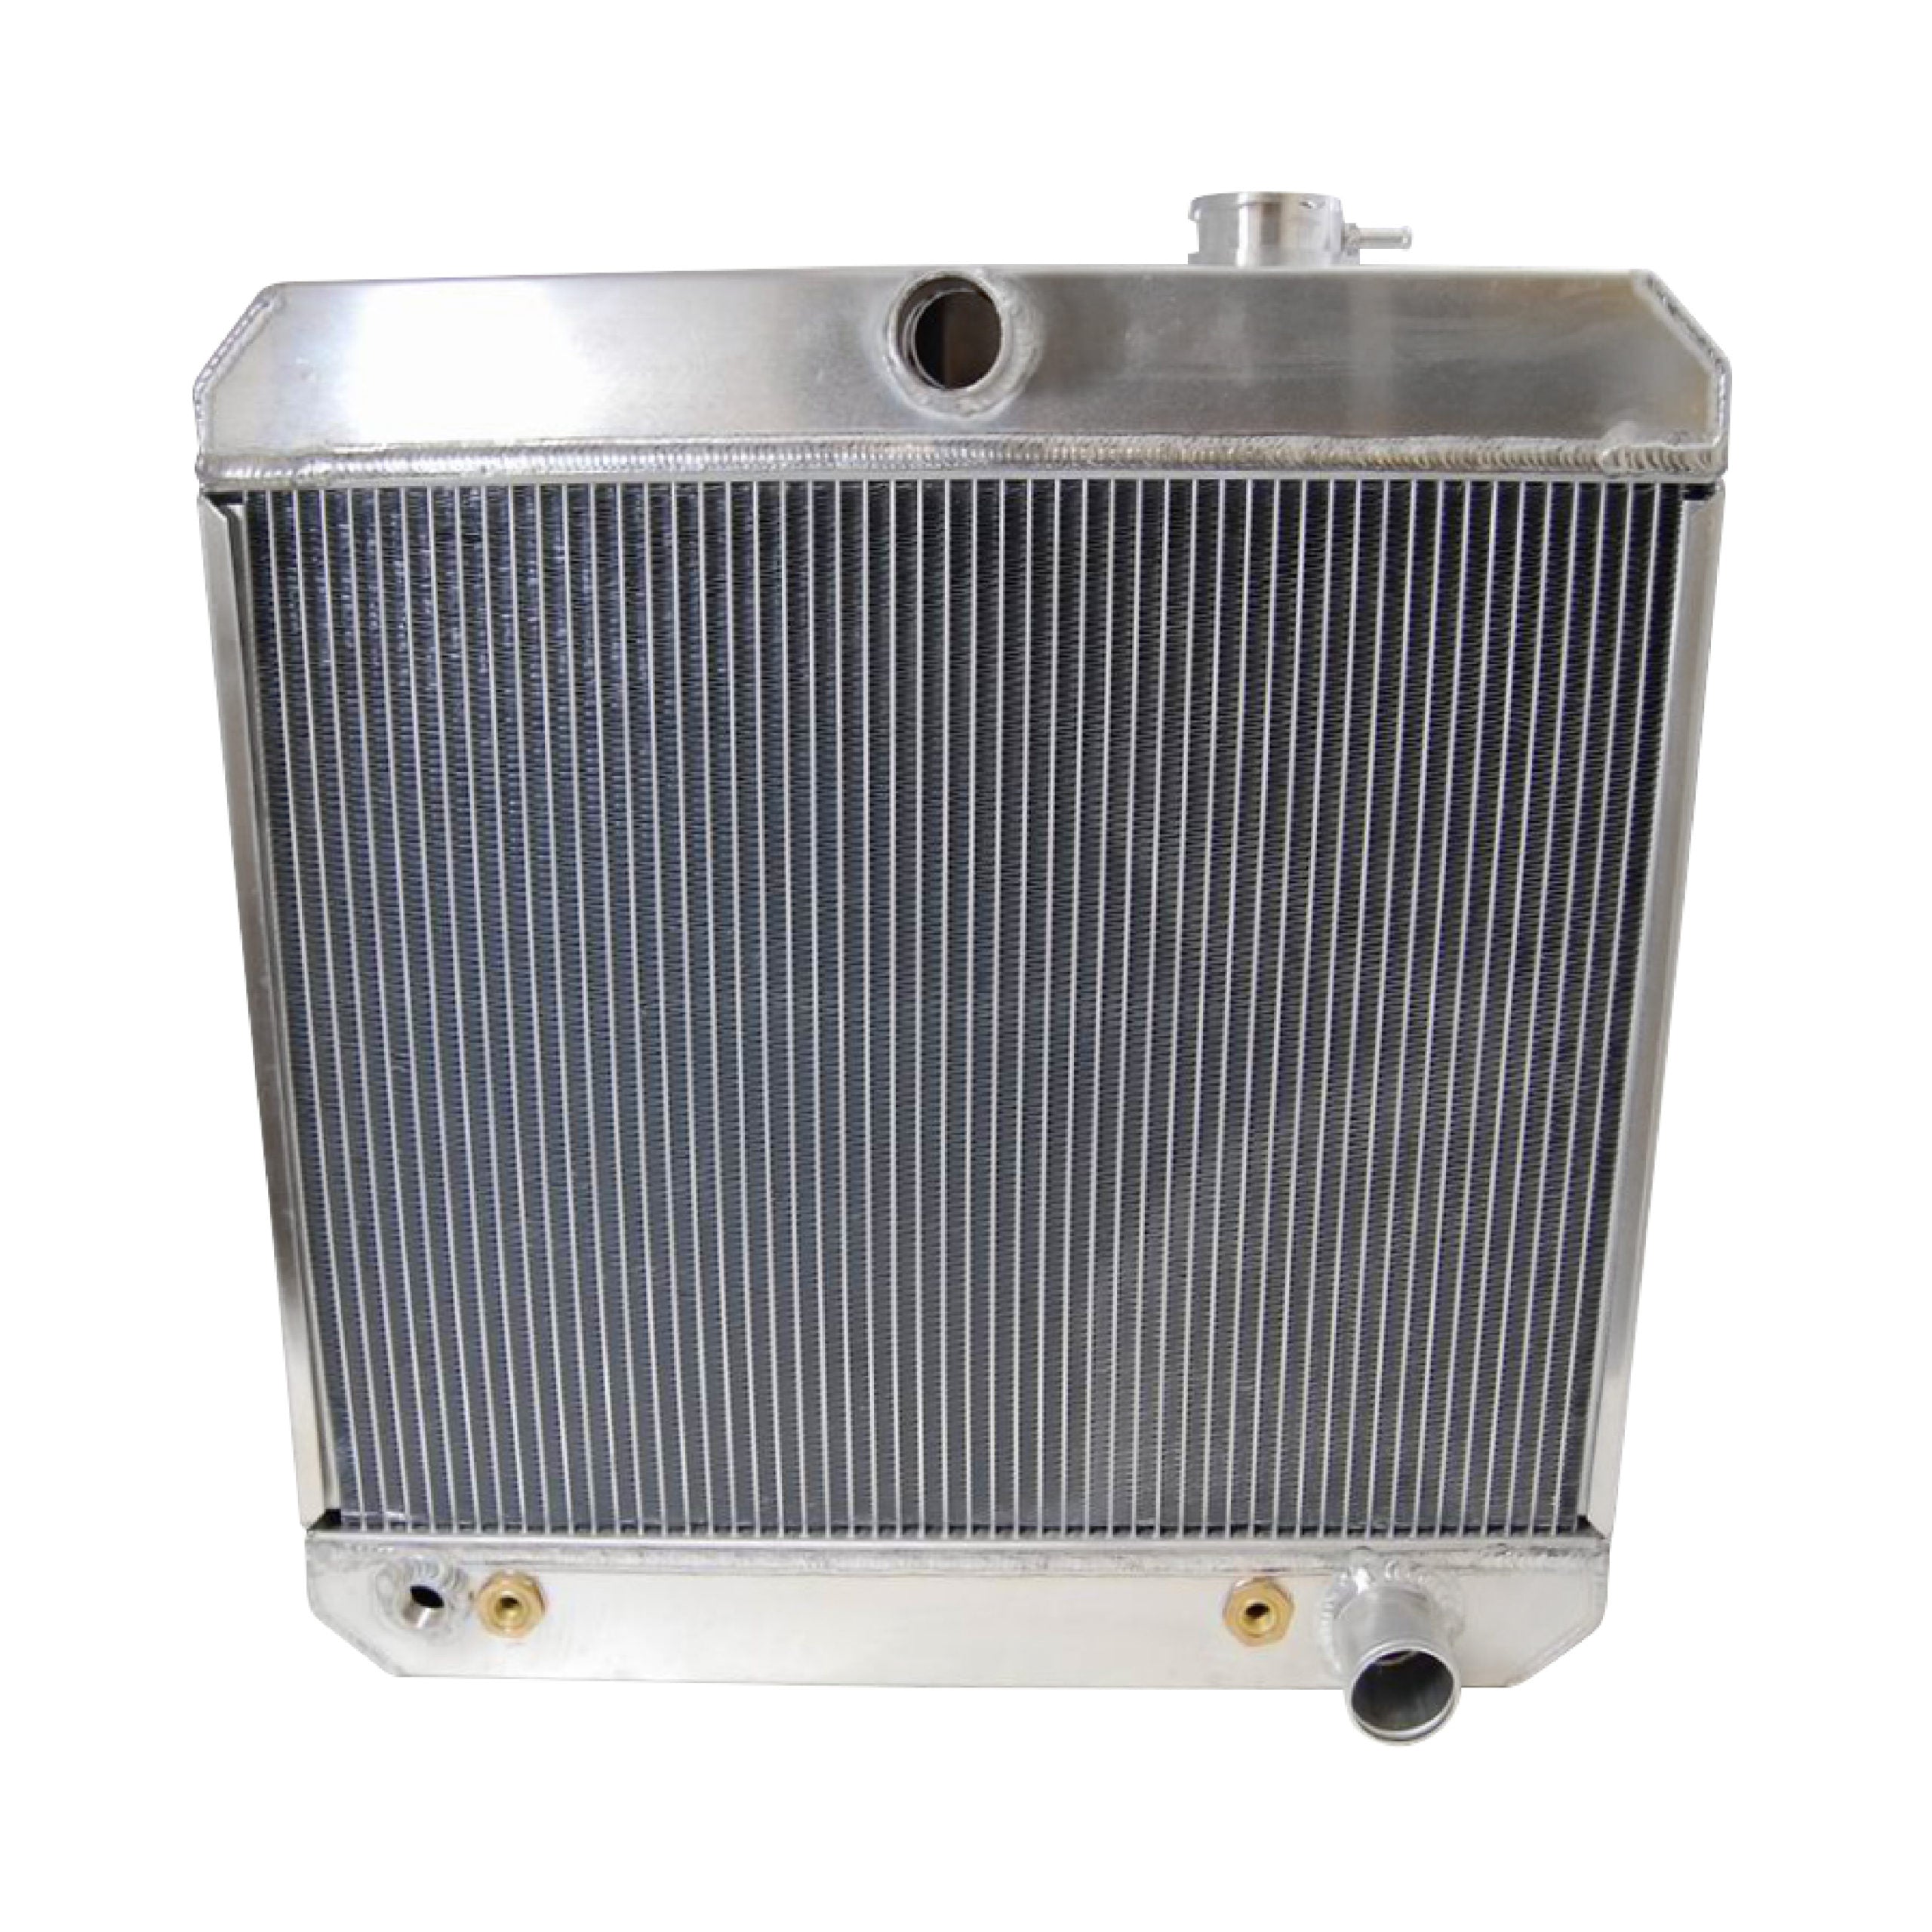 Racing Power Company R1035 55-57 chevy inchtri-five inch aluminum radiator